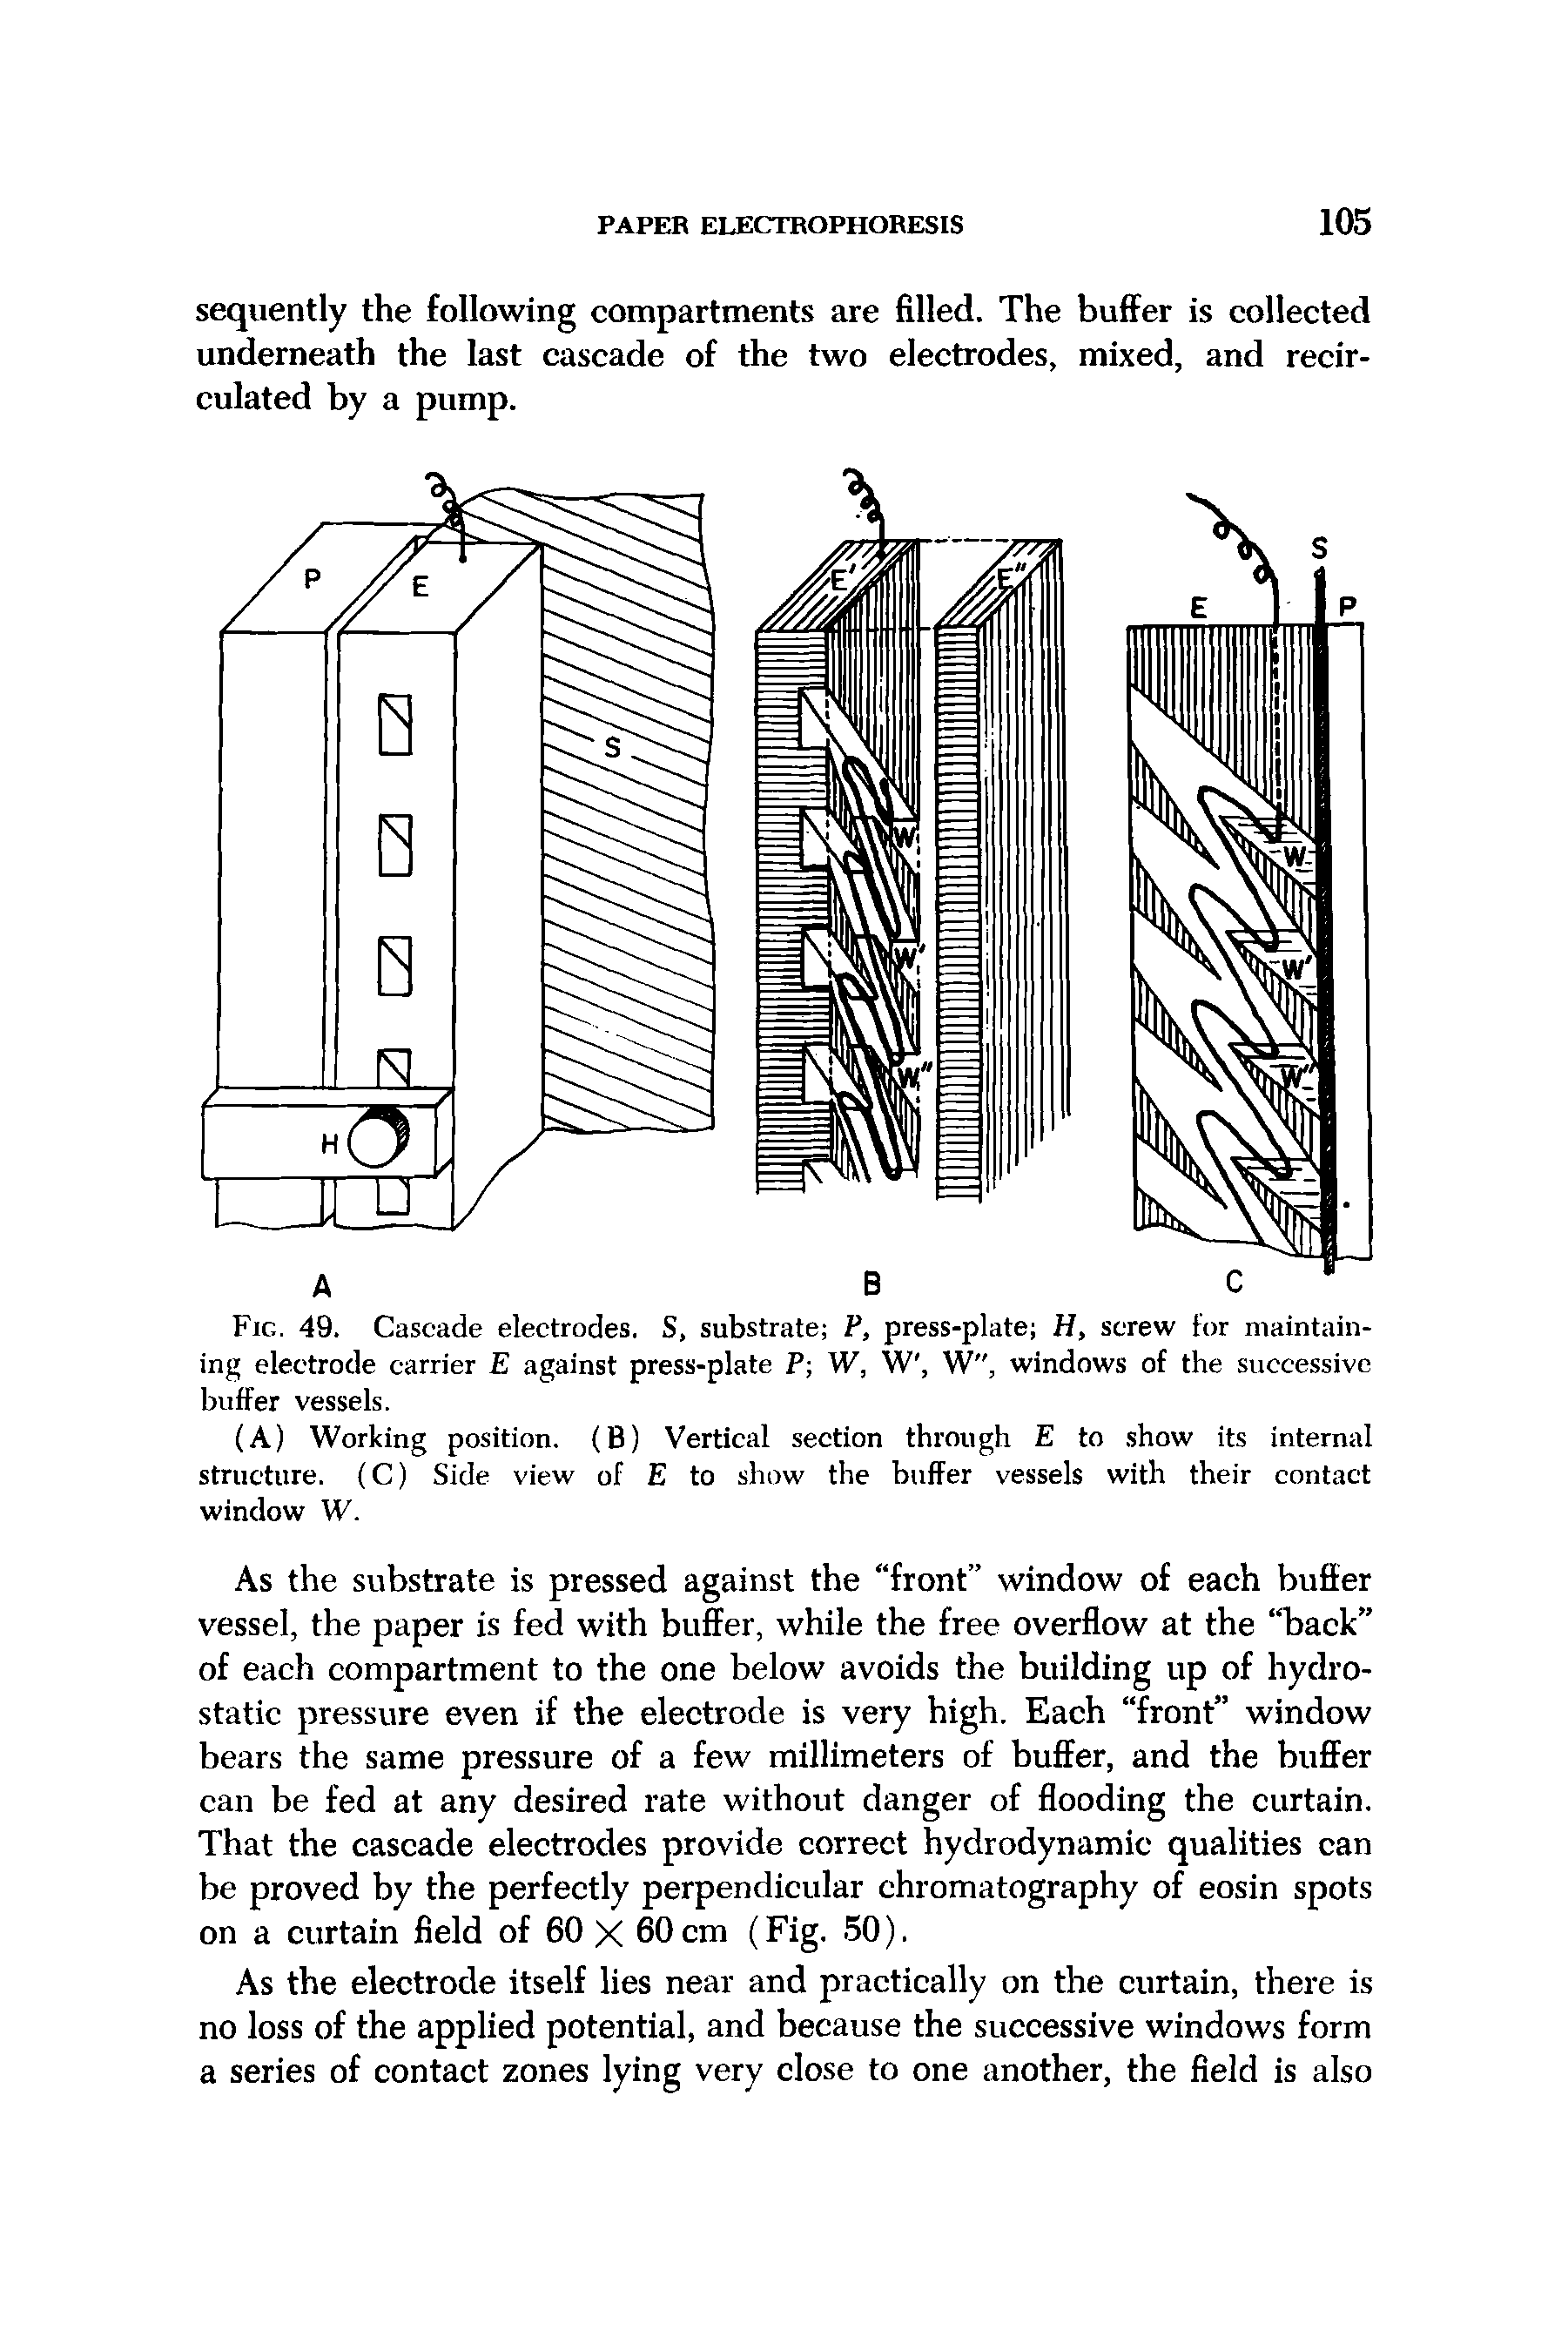 Fig. 49. Cascade electrodes. S, substrate P, press-plate H, screw for maintaining electrode carrier E against press-plate P W, W, W", windows of the successive buffer vessels.